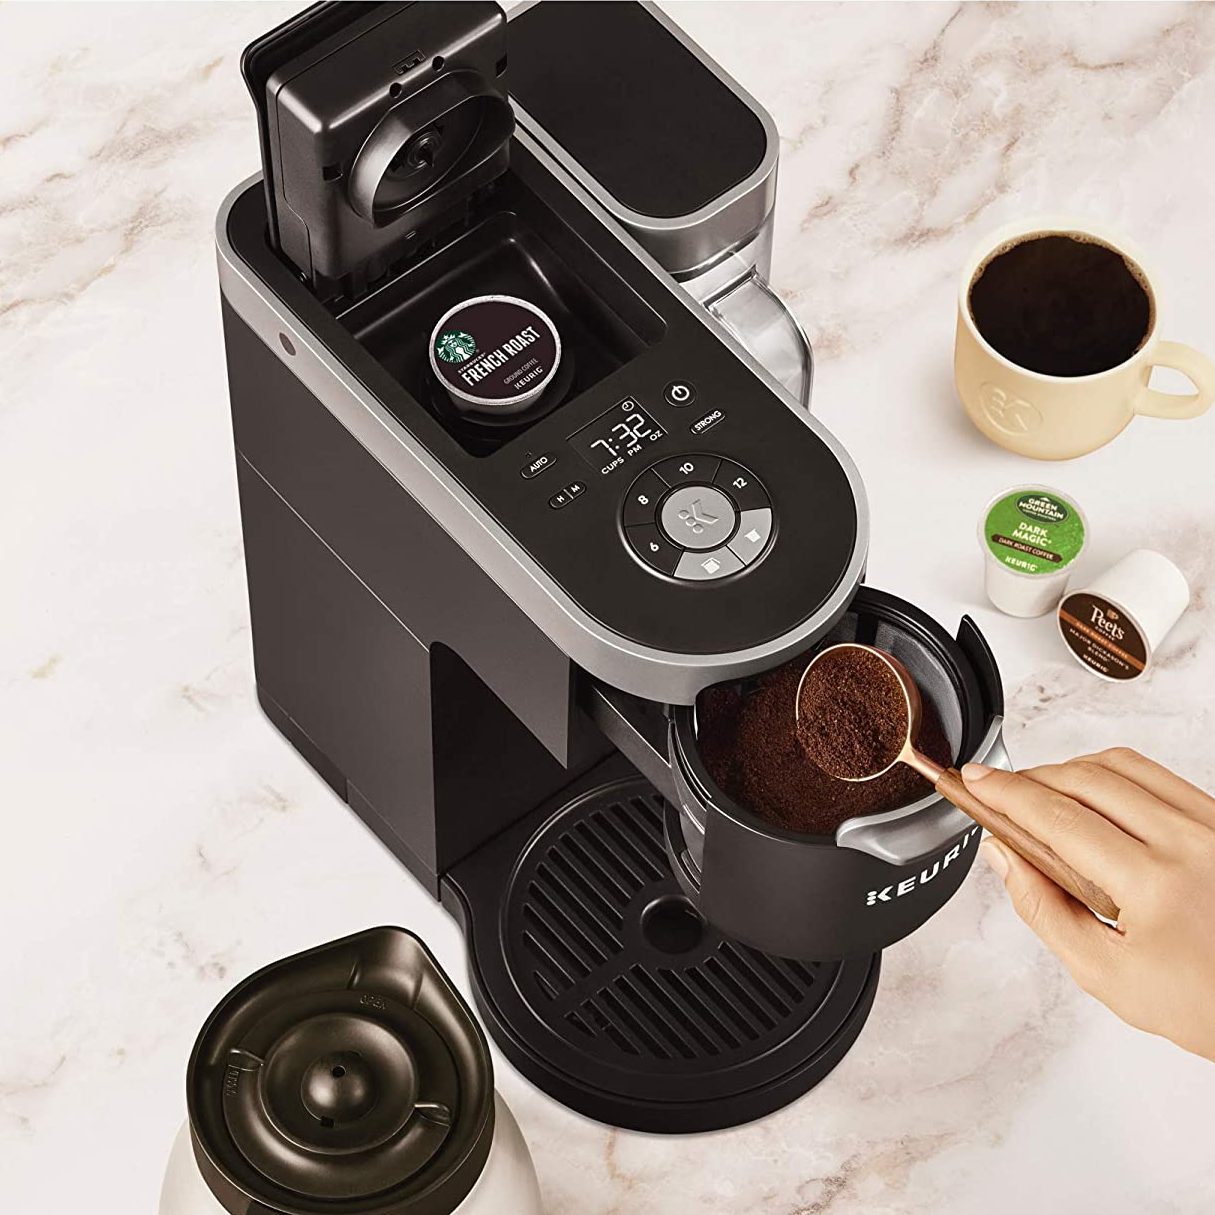 Sboly Coffee Machine 3 in 1, Tea & Coffee Maker for K Cup, Ground Coffee and Tea Leaf, Single Serve Coffee Maker Brewer with Self Cleaning, Fast